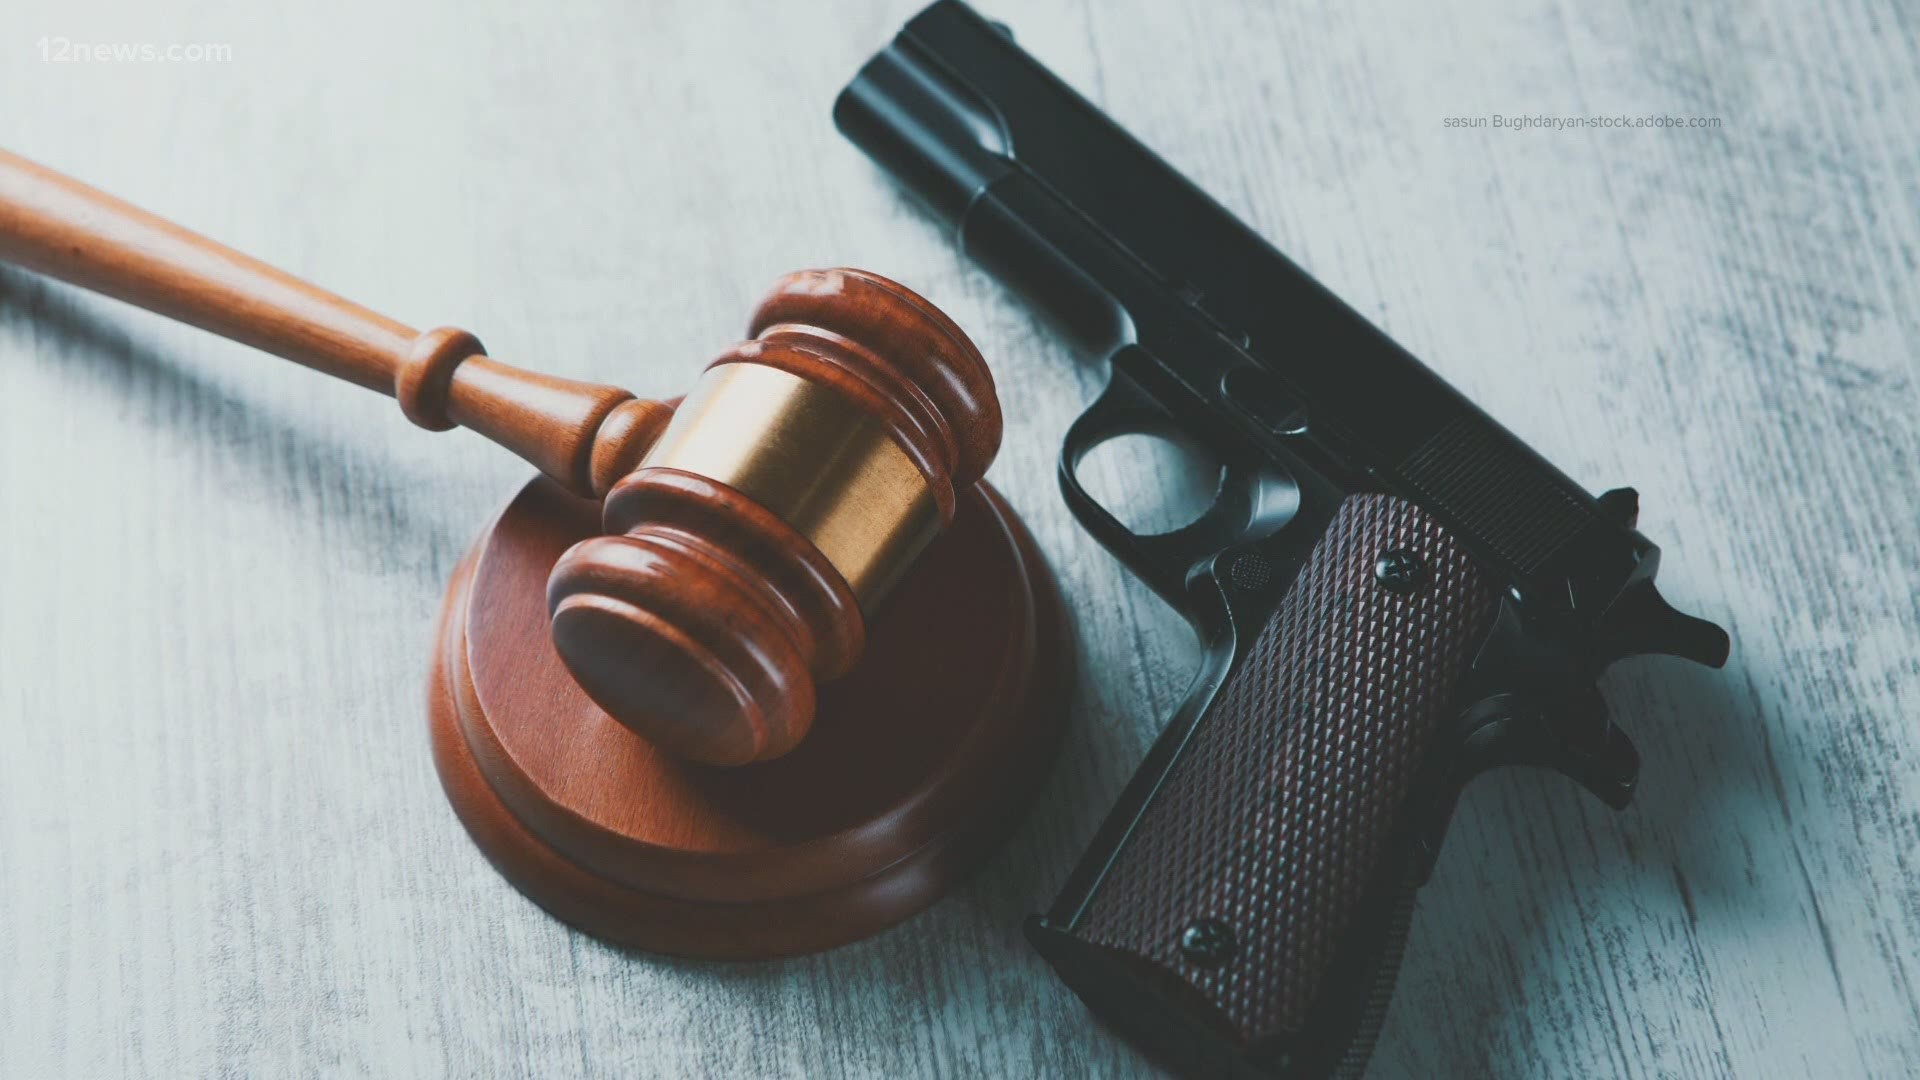 A recent ruling from the 9th Circuit Court says carrying your gun in public is not a Constitutional right. The case is likely going to head to the Supreme Court.